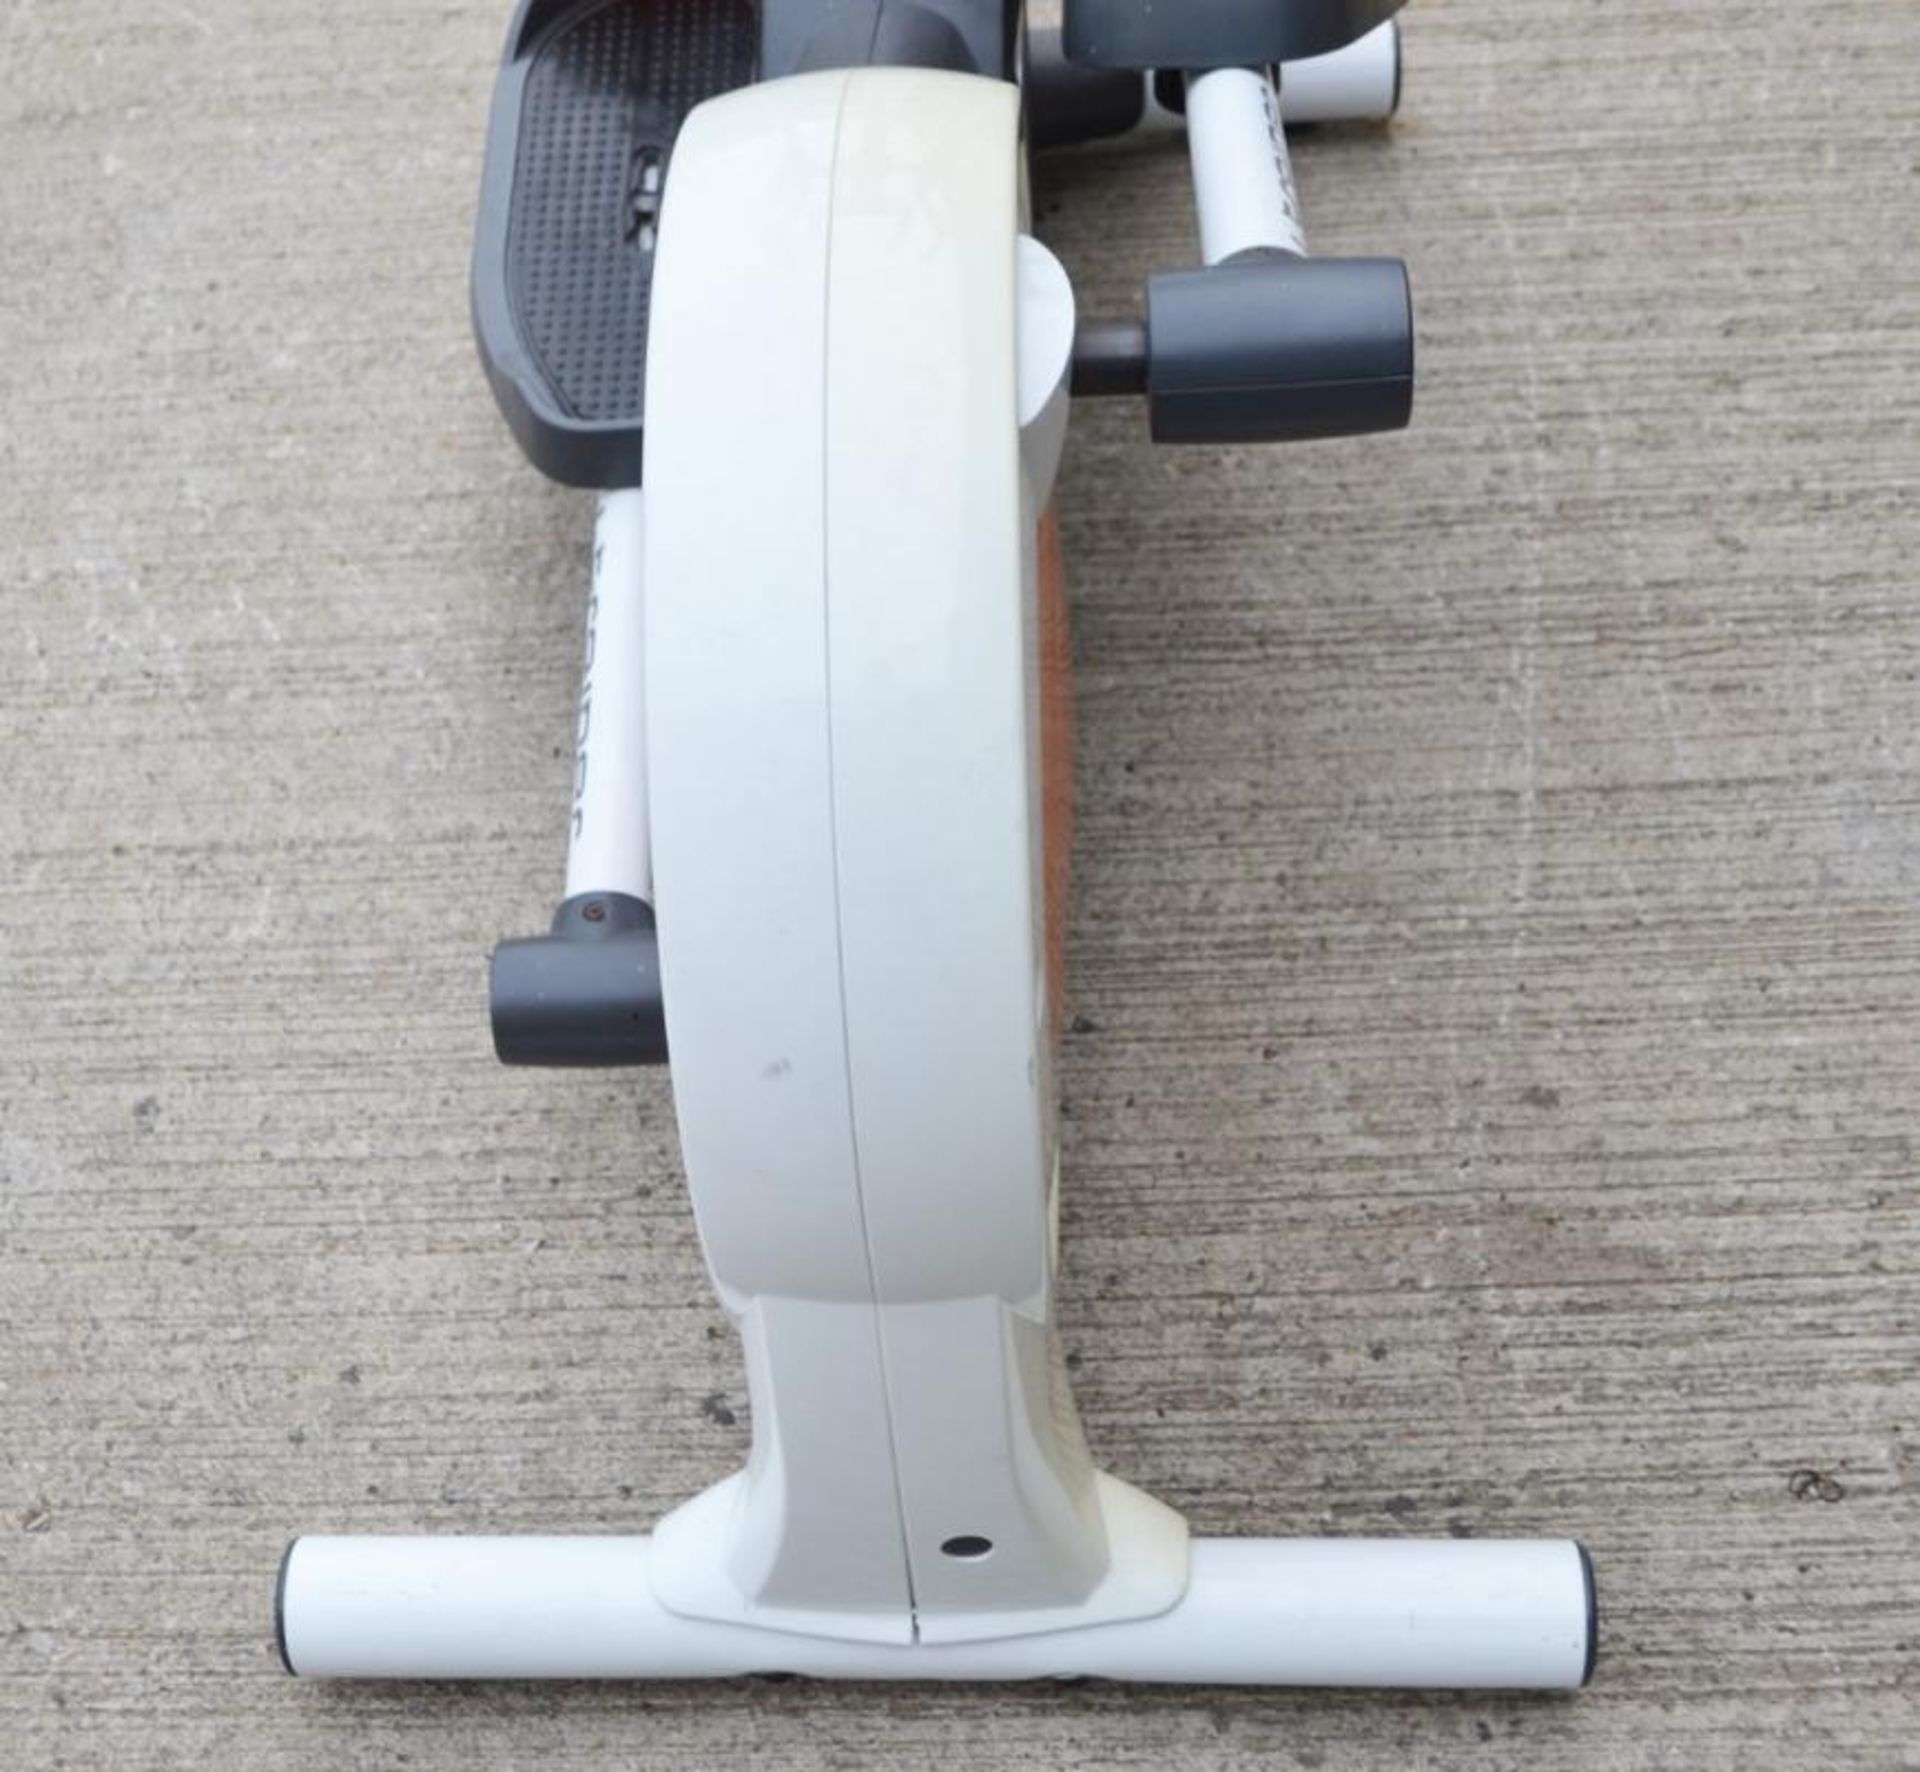 1 x Reebok Cross Trainer - Ref: H578 - CL380 - NO VAT - Location: Altrincham WA14 - Used In Good Co - Image 12 of 17